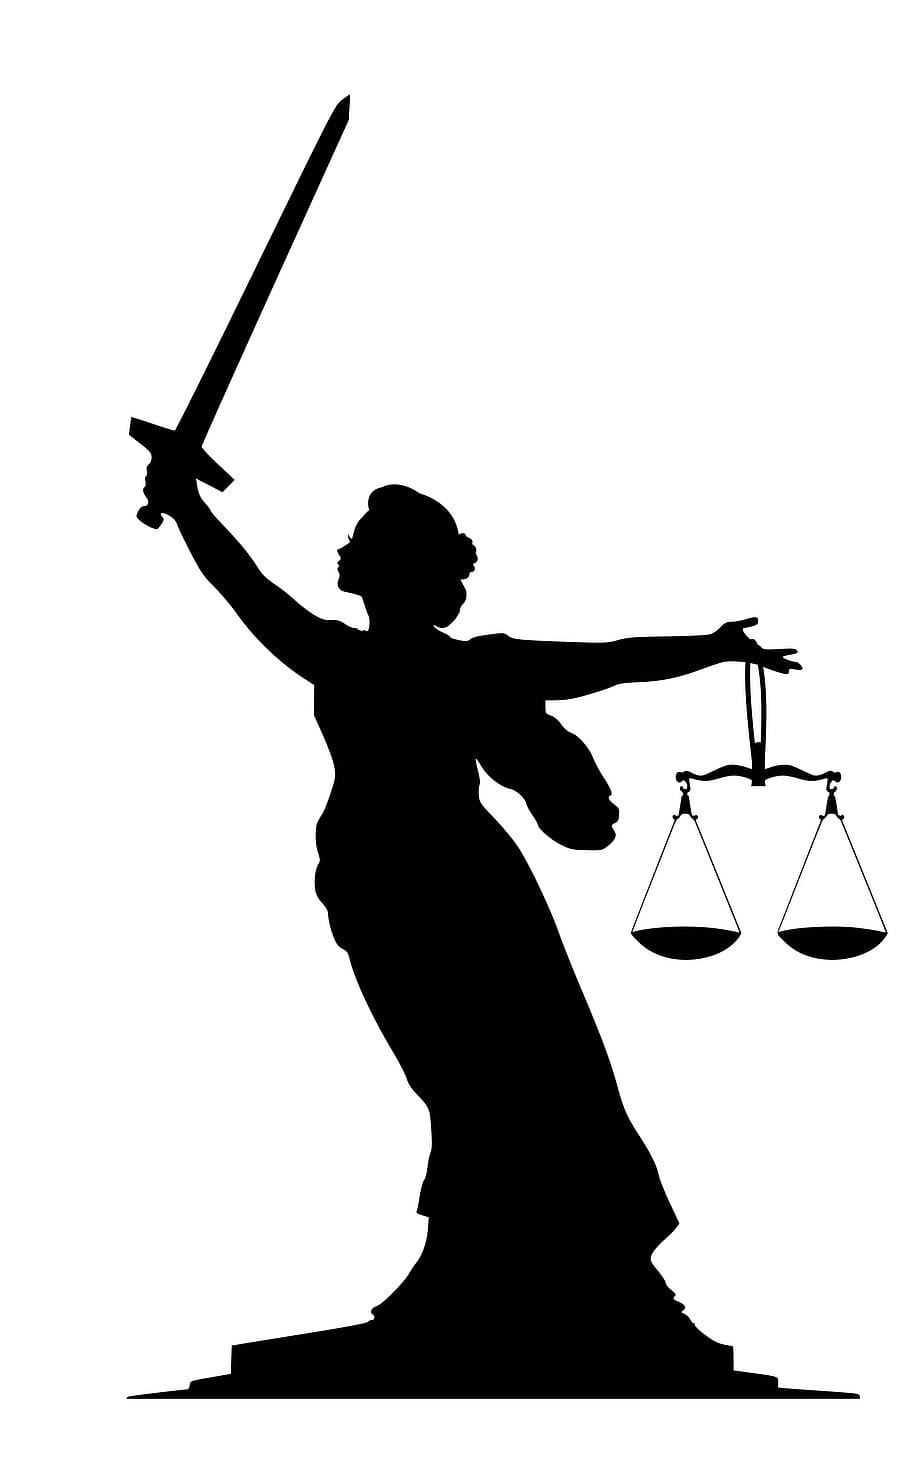 silhouette, lady justice, raised, sword., lady, justice, legal, scales, law, justicia